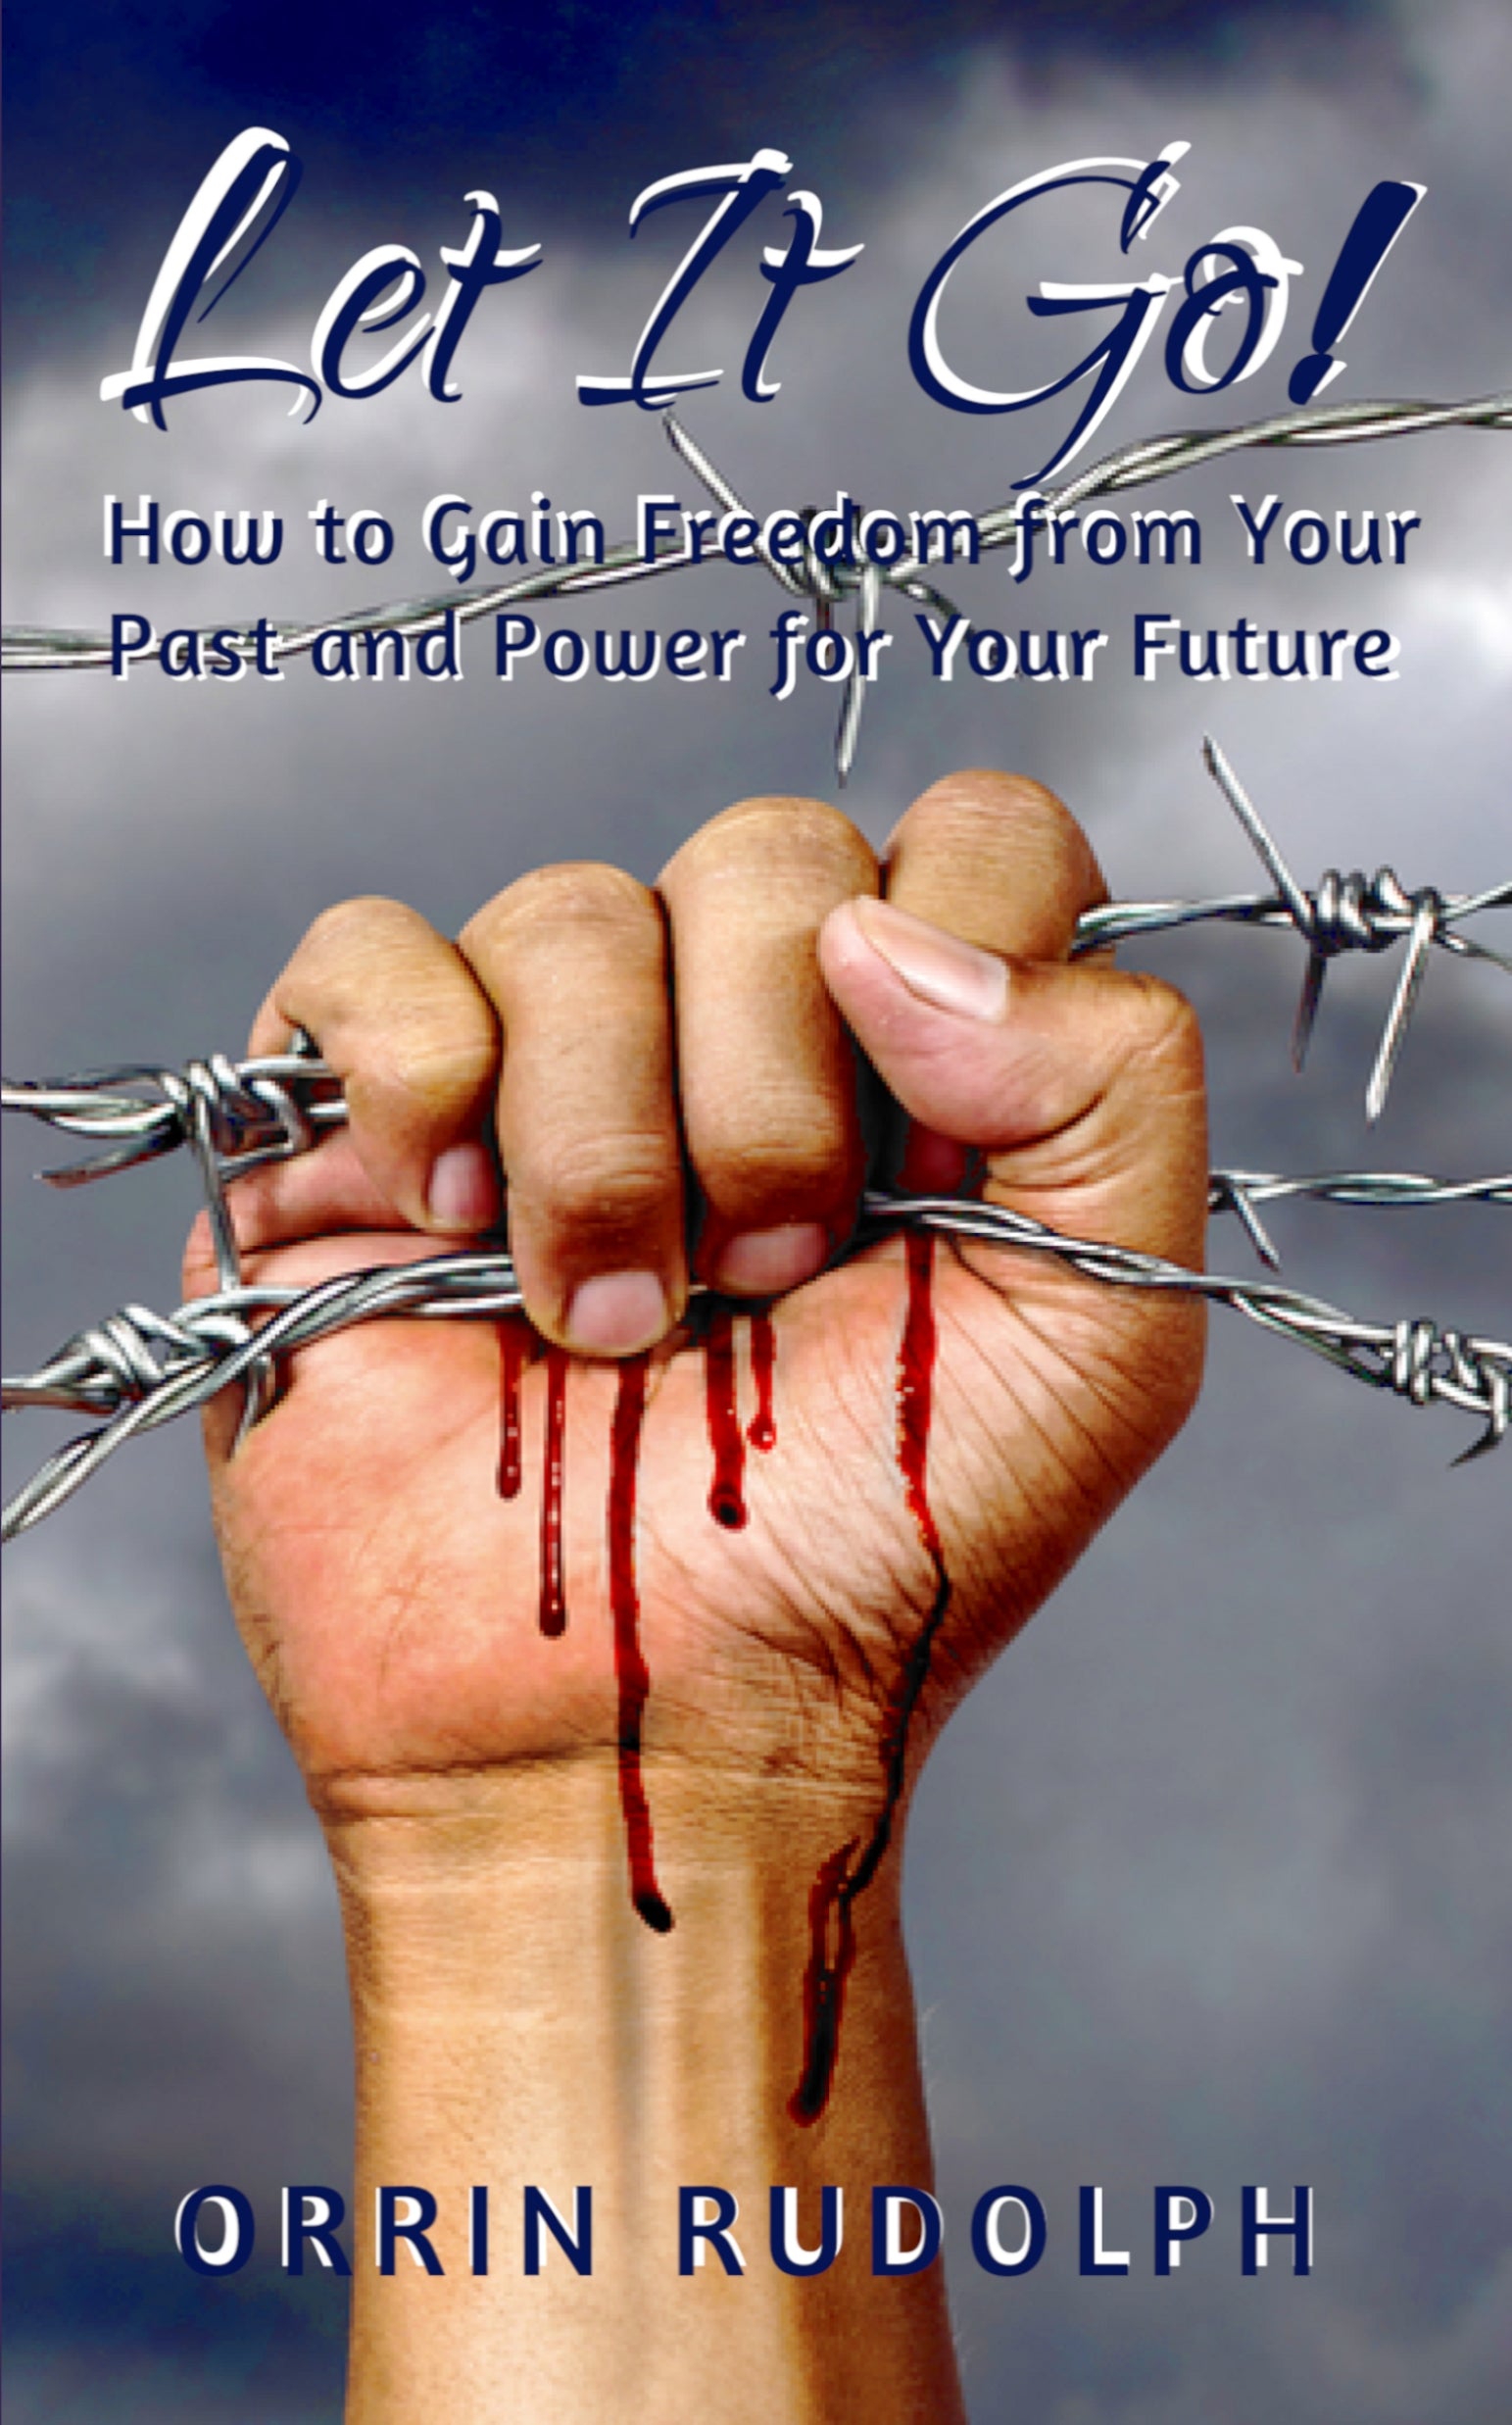 Let it Go! How to Gain Freedom from Your Past and Power for your Future